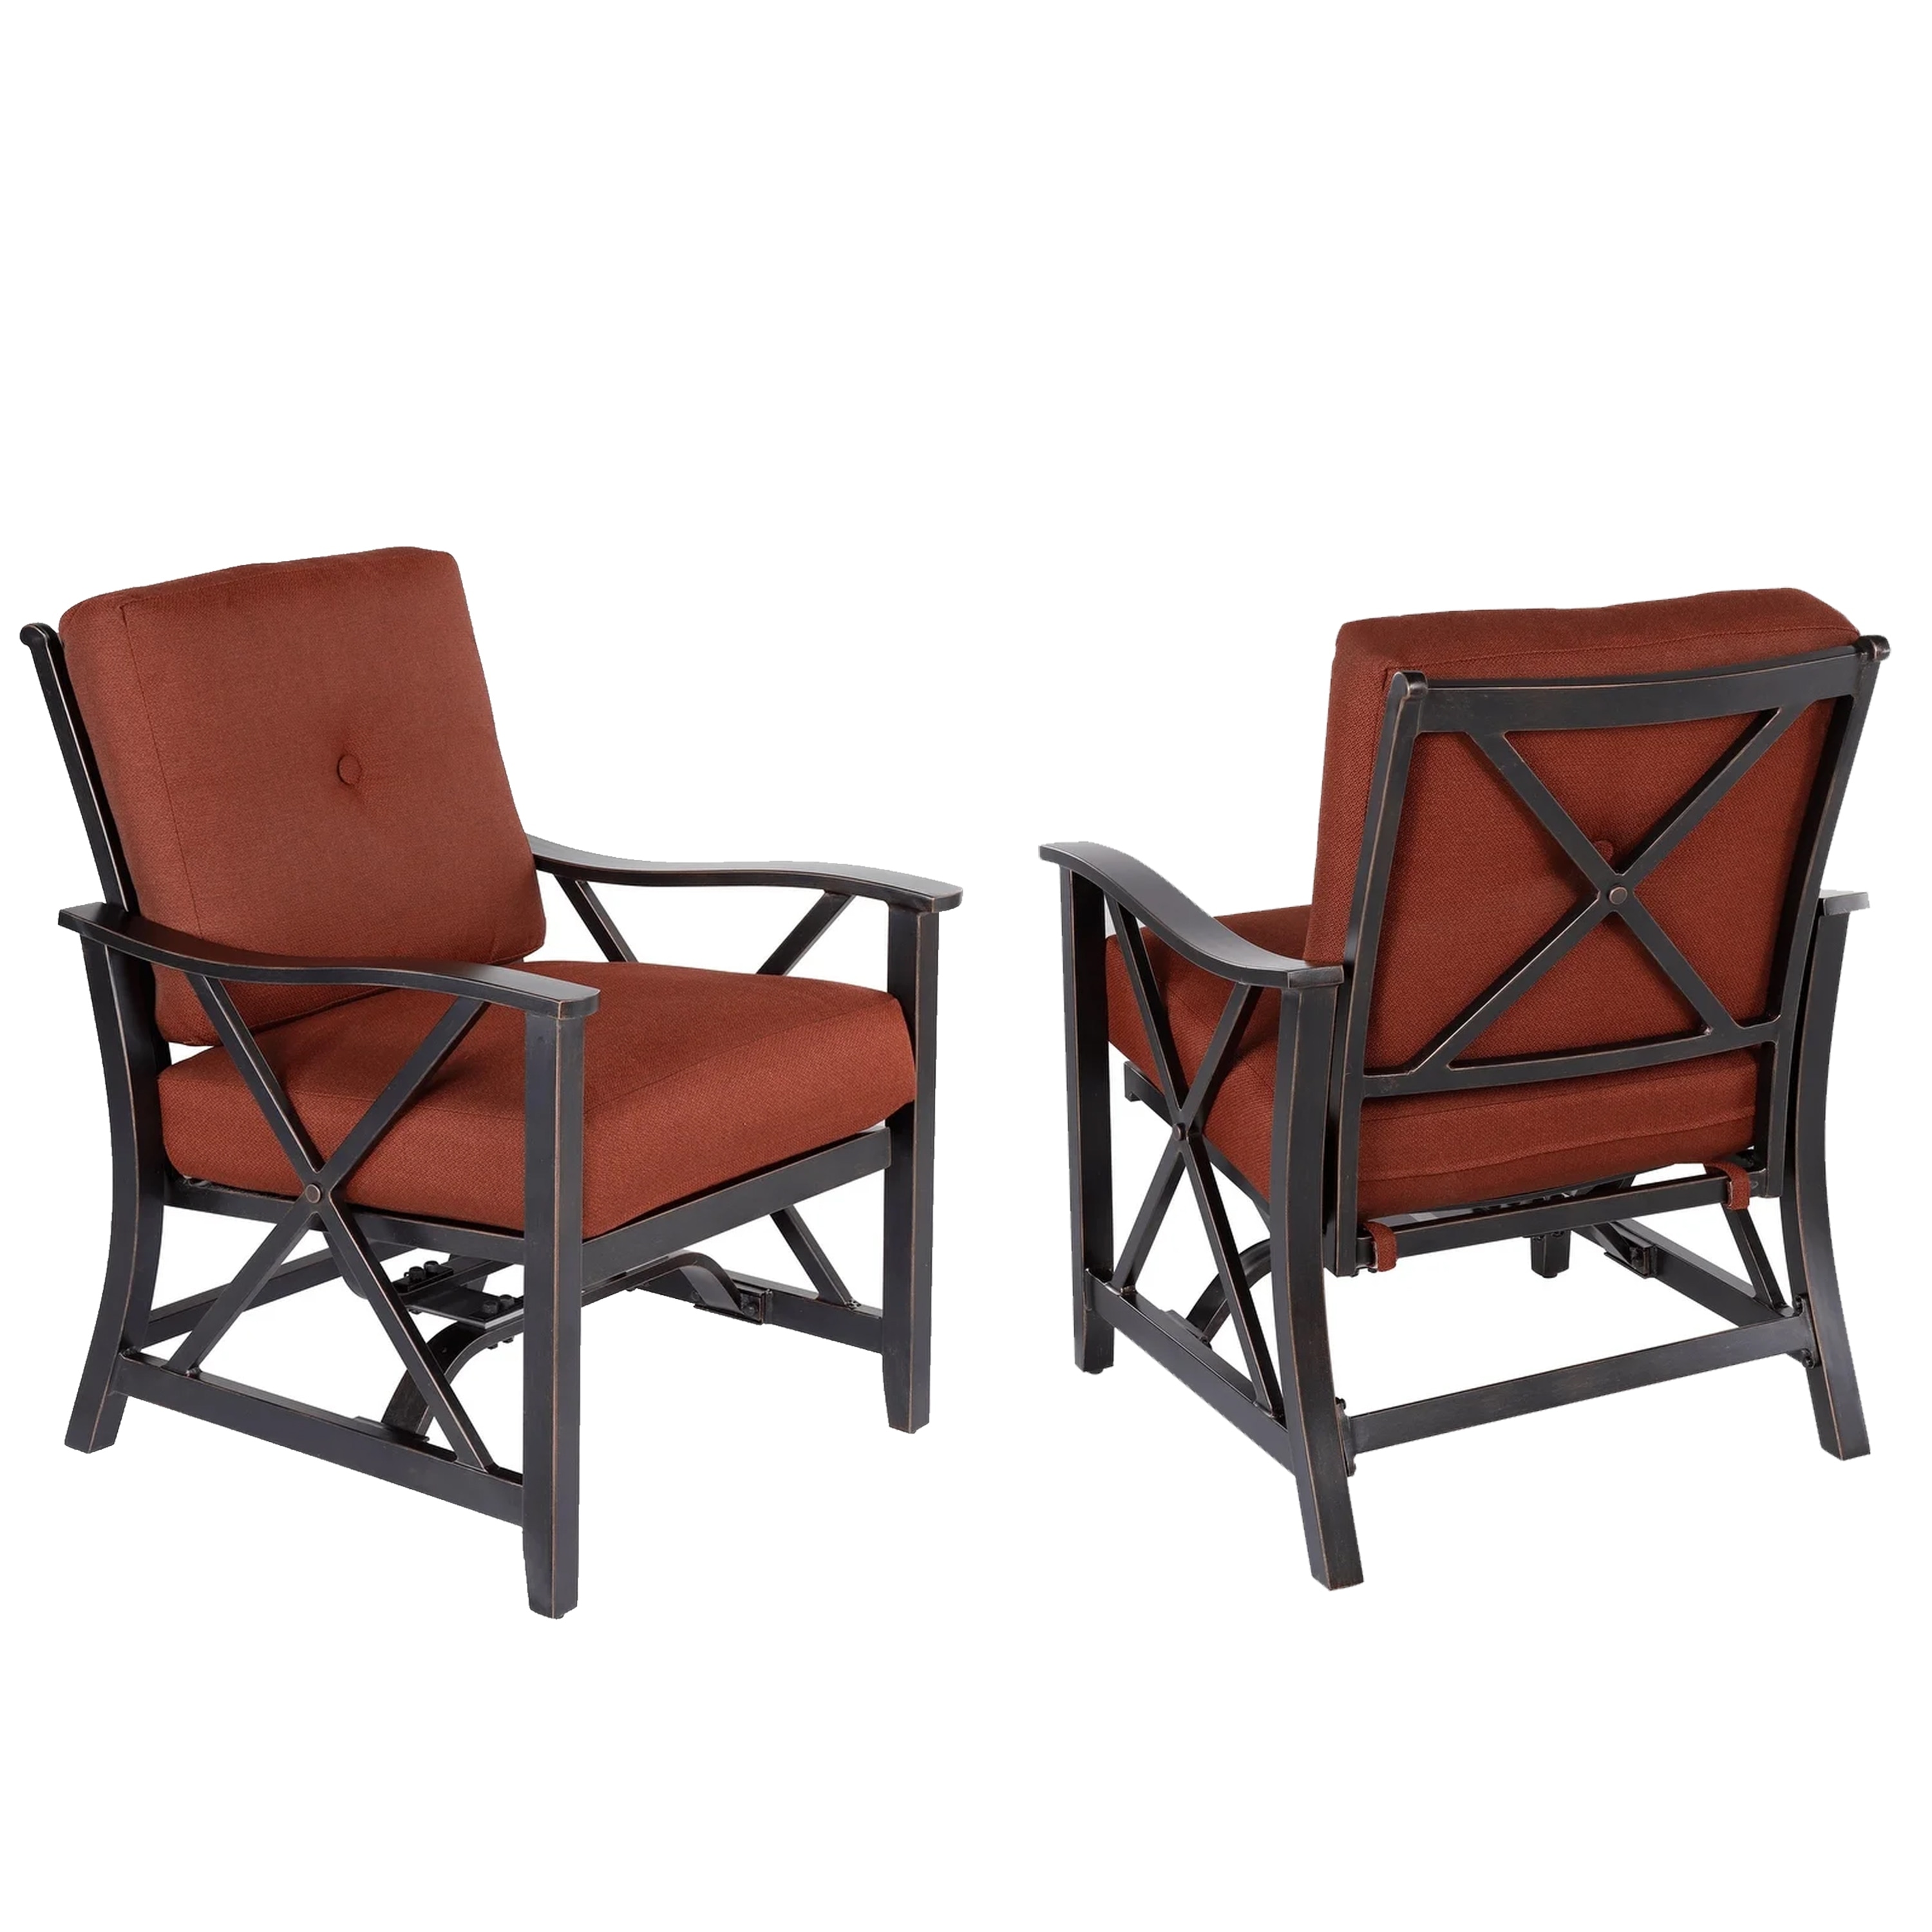 Aluminum Outdoor Deep Seating Rocking Club Chairs In Antique Copper Finish With Thick Red Polyester Cushions (set Of 2)